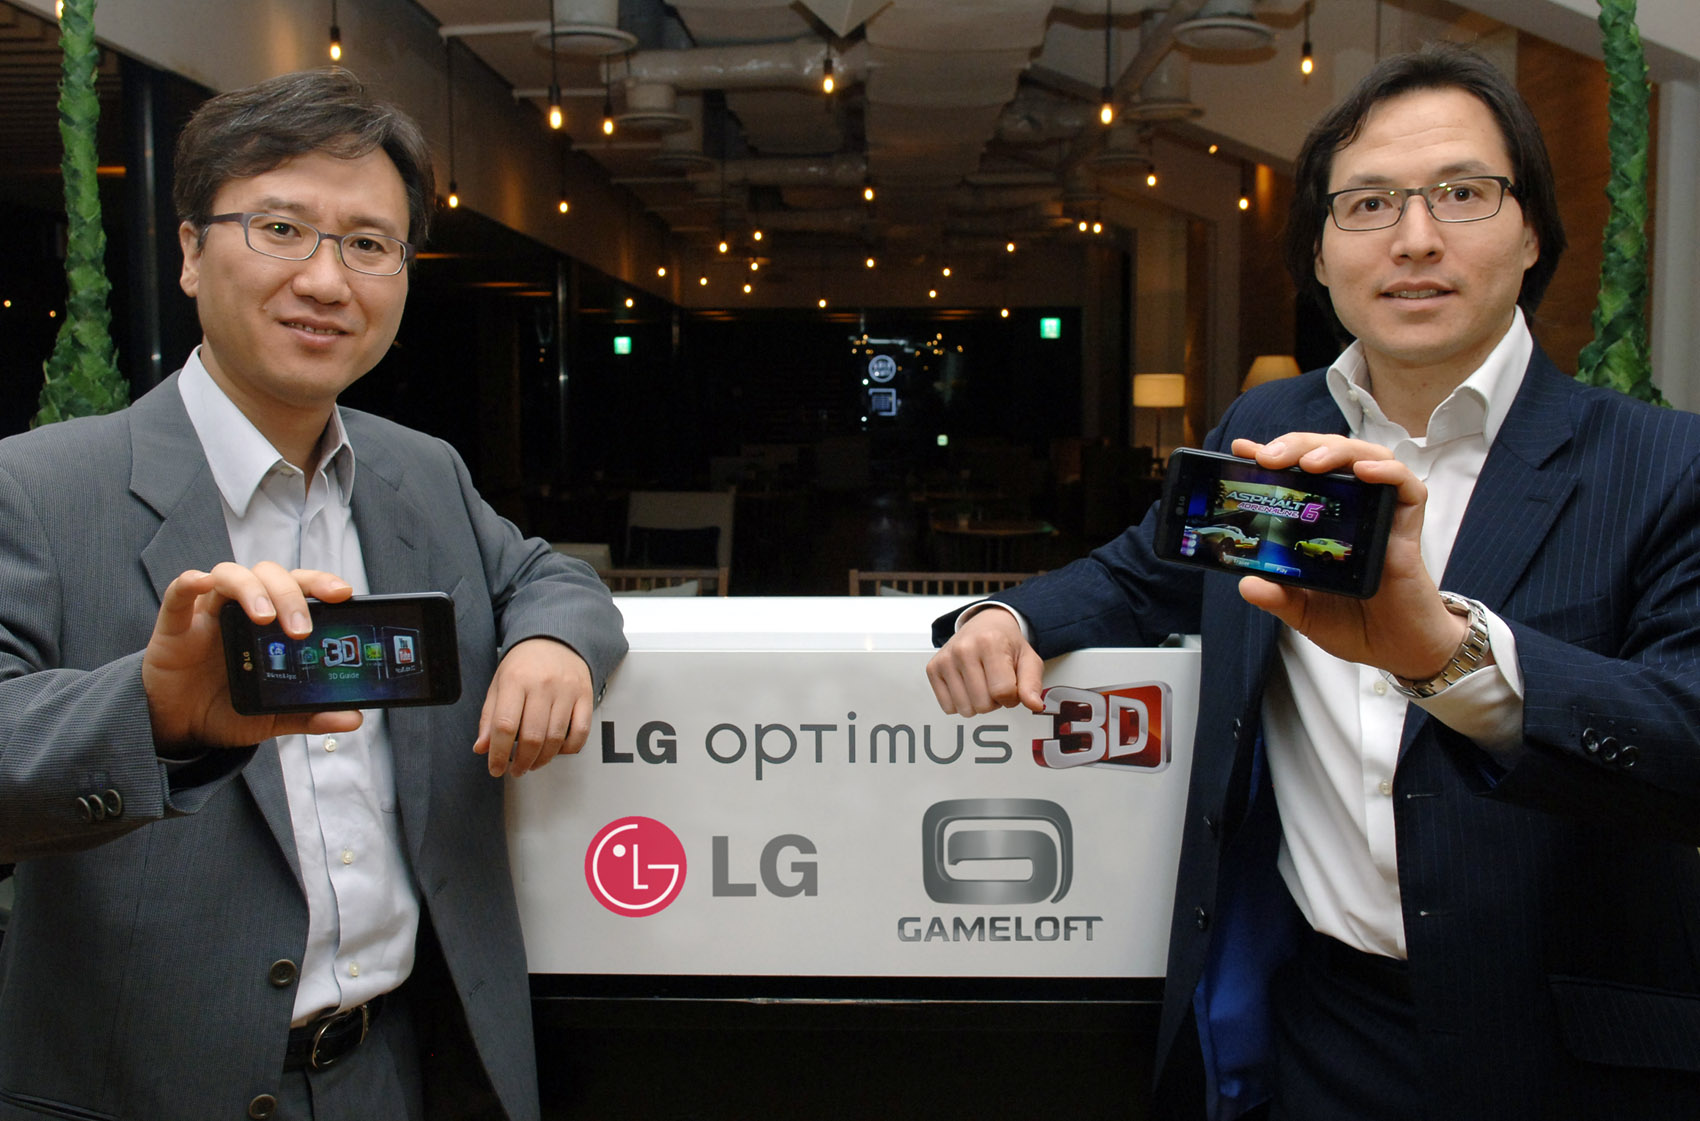 Yong-seok Jang, vice president of Business Strategy at LG Electronics Mobile Communications Company, and a representative of Gameloft hold LG Optimus 3Ds, showing the devices front